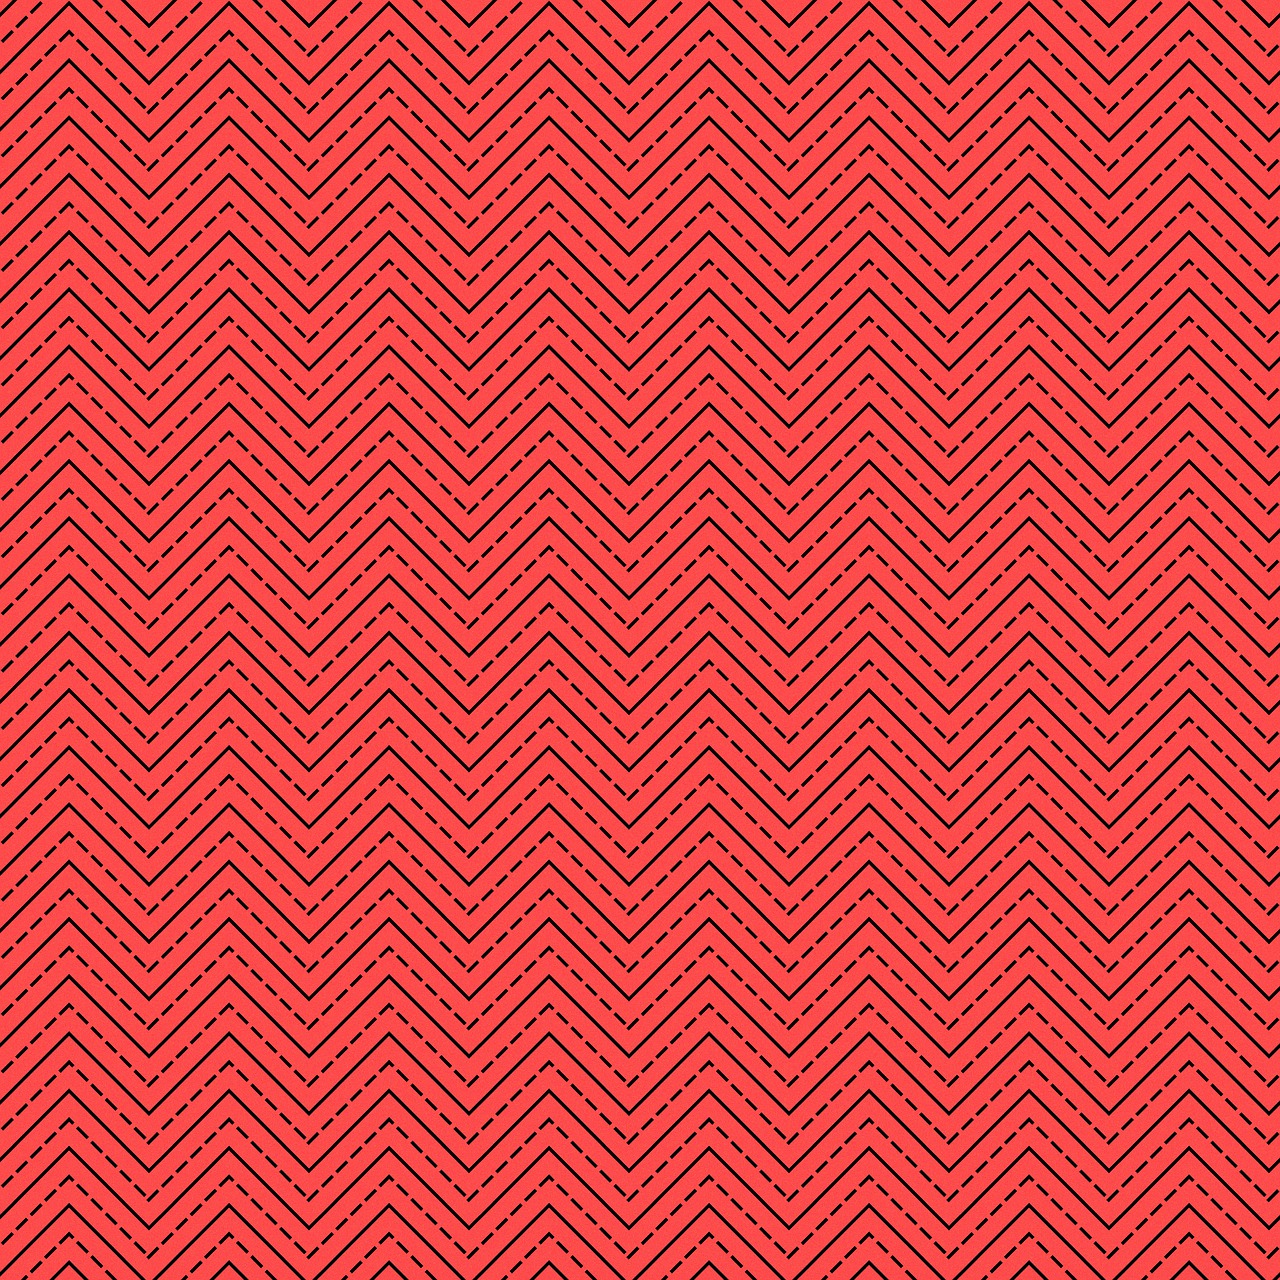 a red and black zigzag pattern, inspired by Katsushika Ōi, op art, scanlines, seamless micro detail, thin red lines, solid background